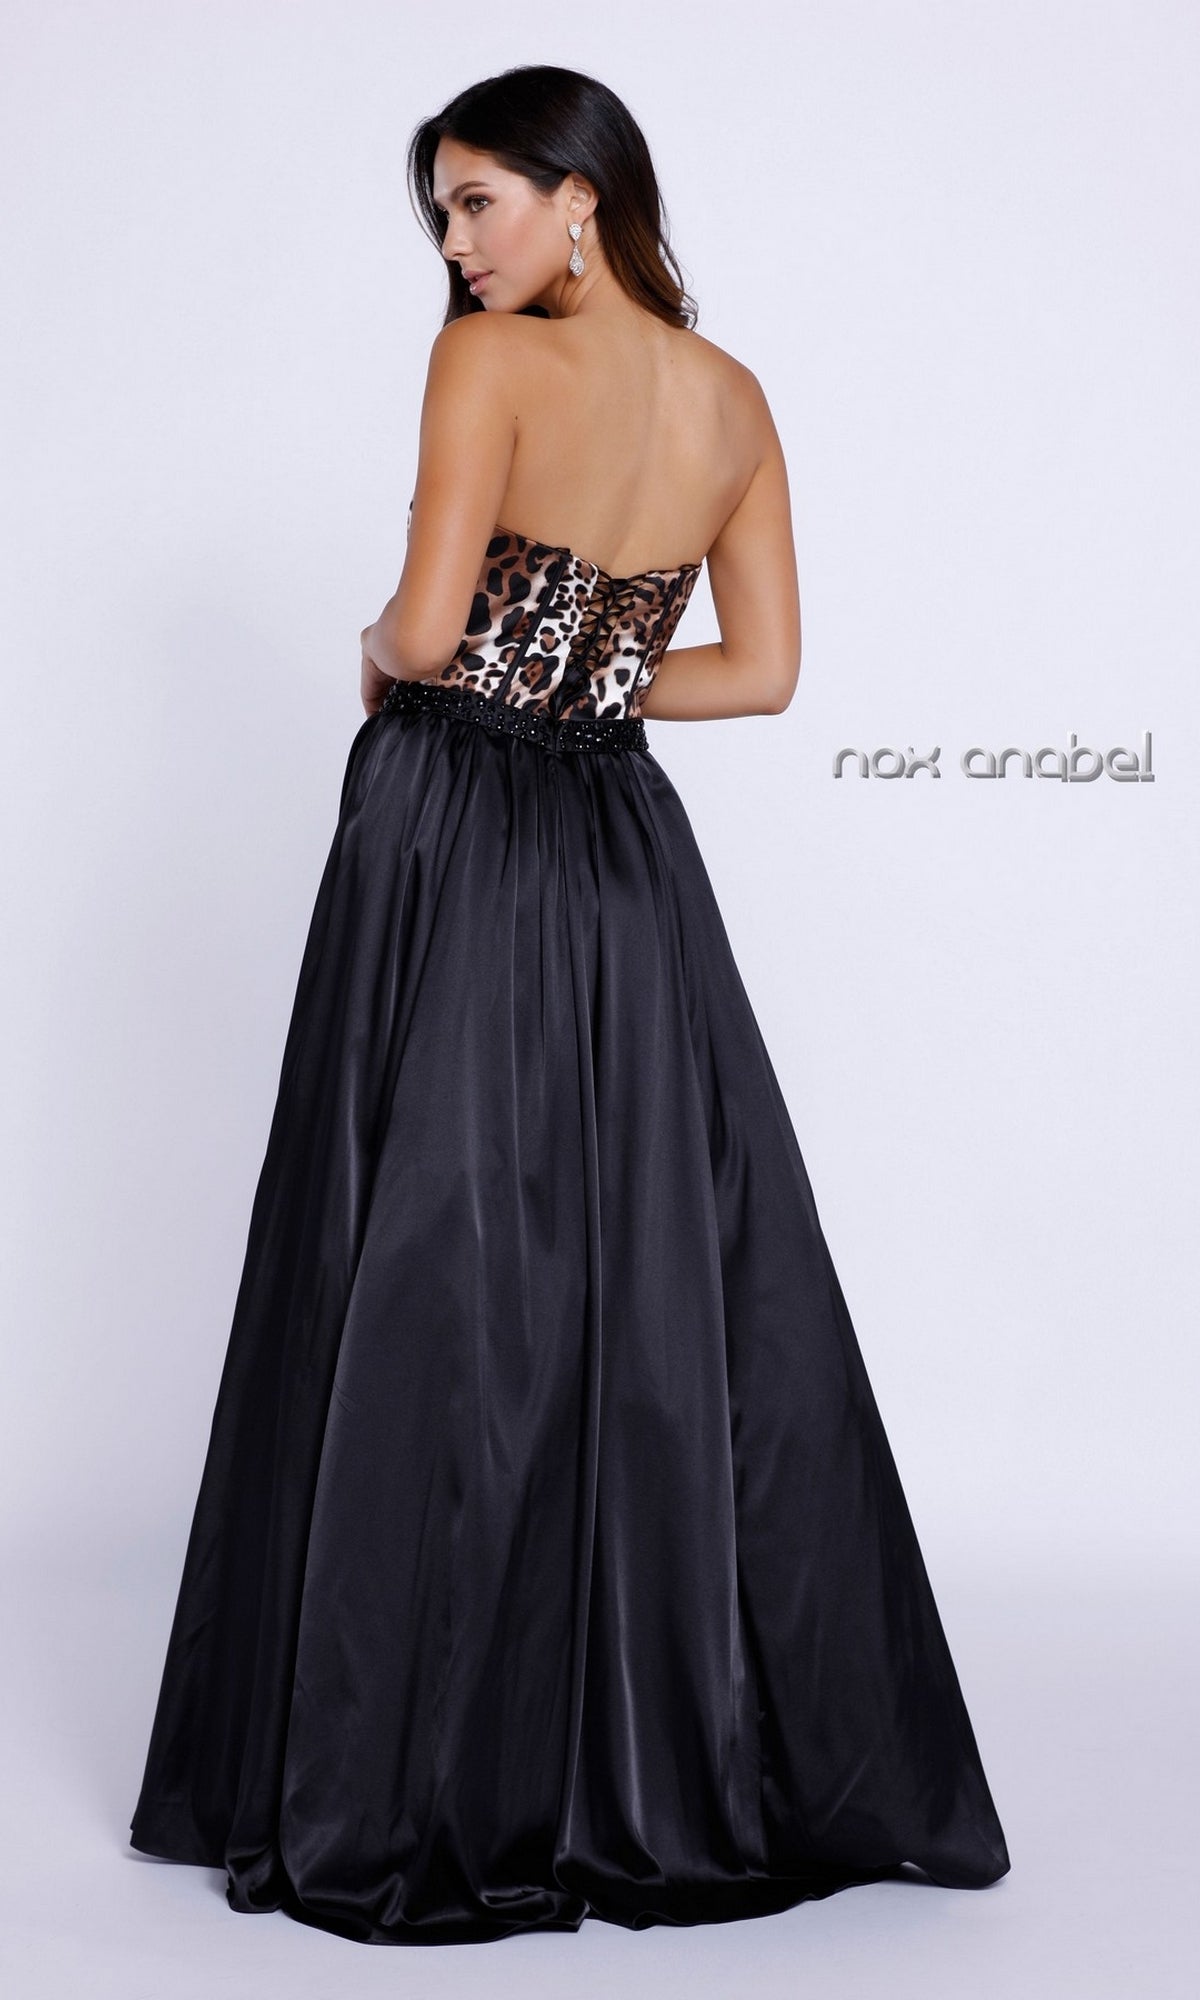  Long Ball Gown With Leopard Print Bodice